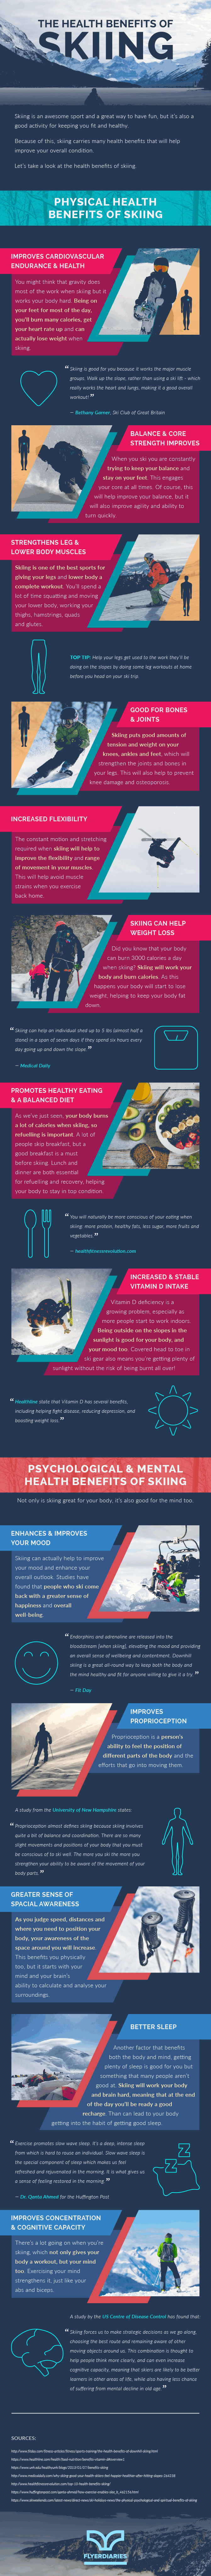 The Health Benefits Of Skiing Infographic